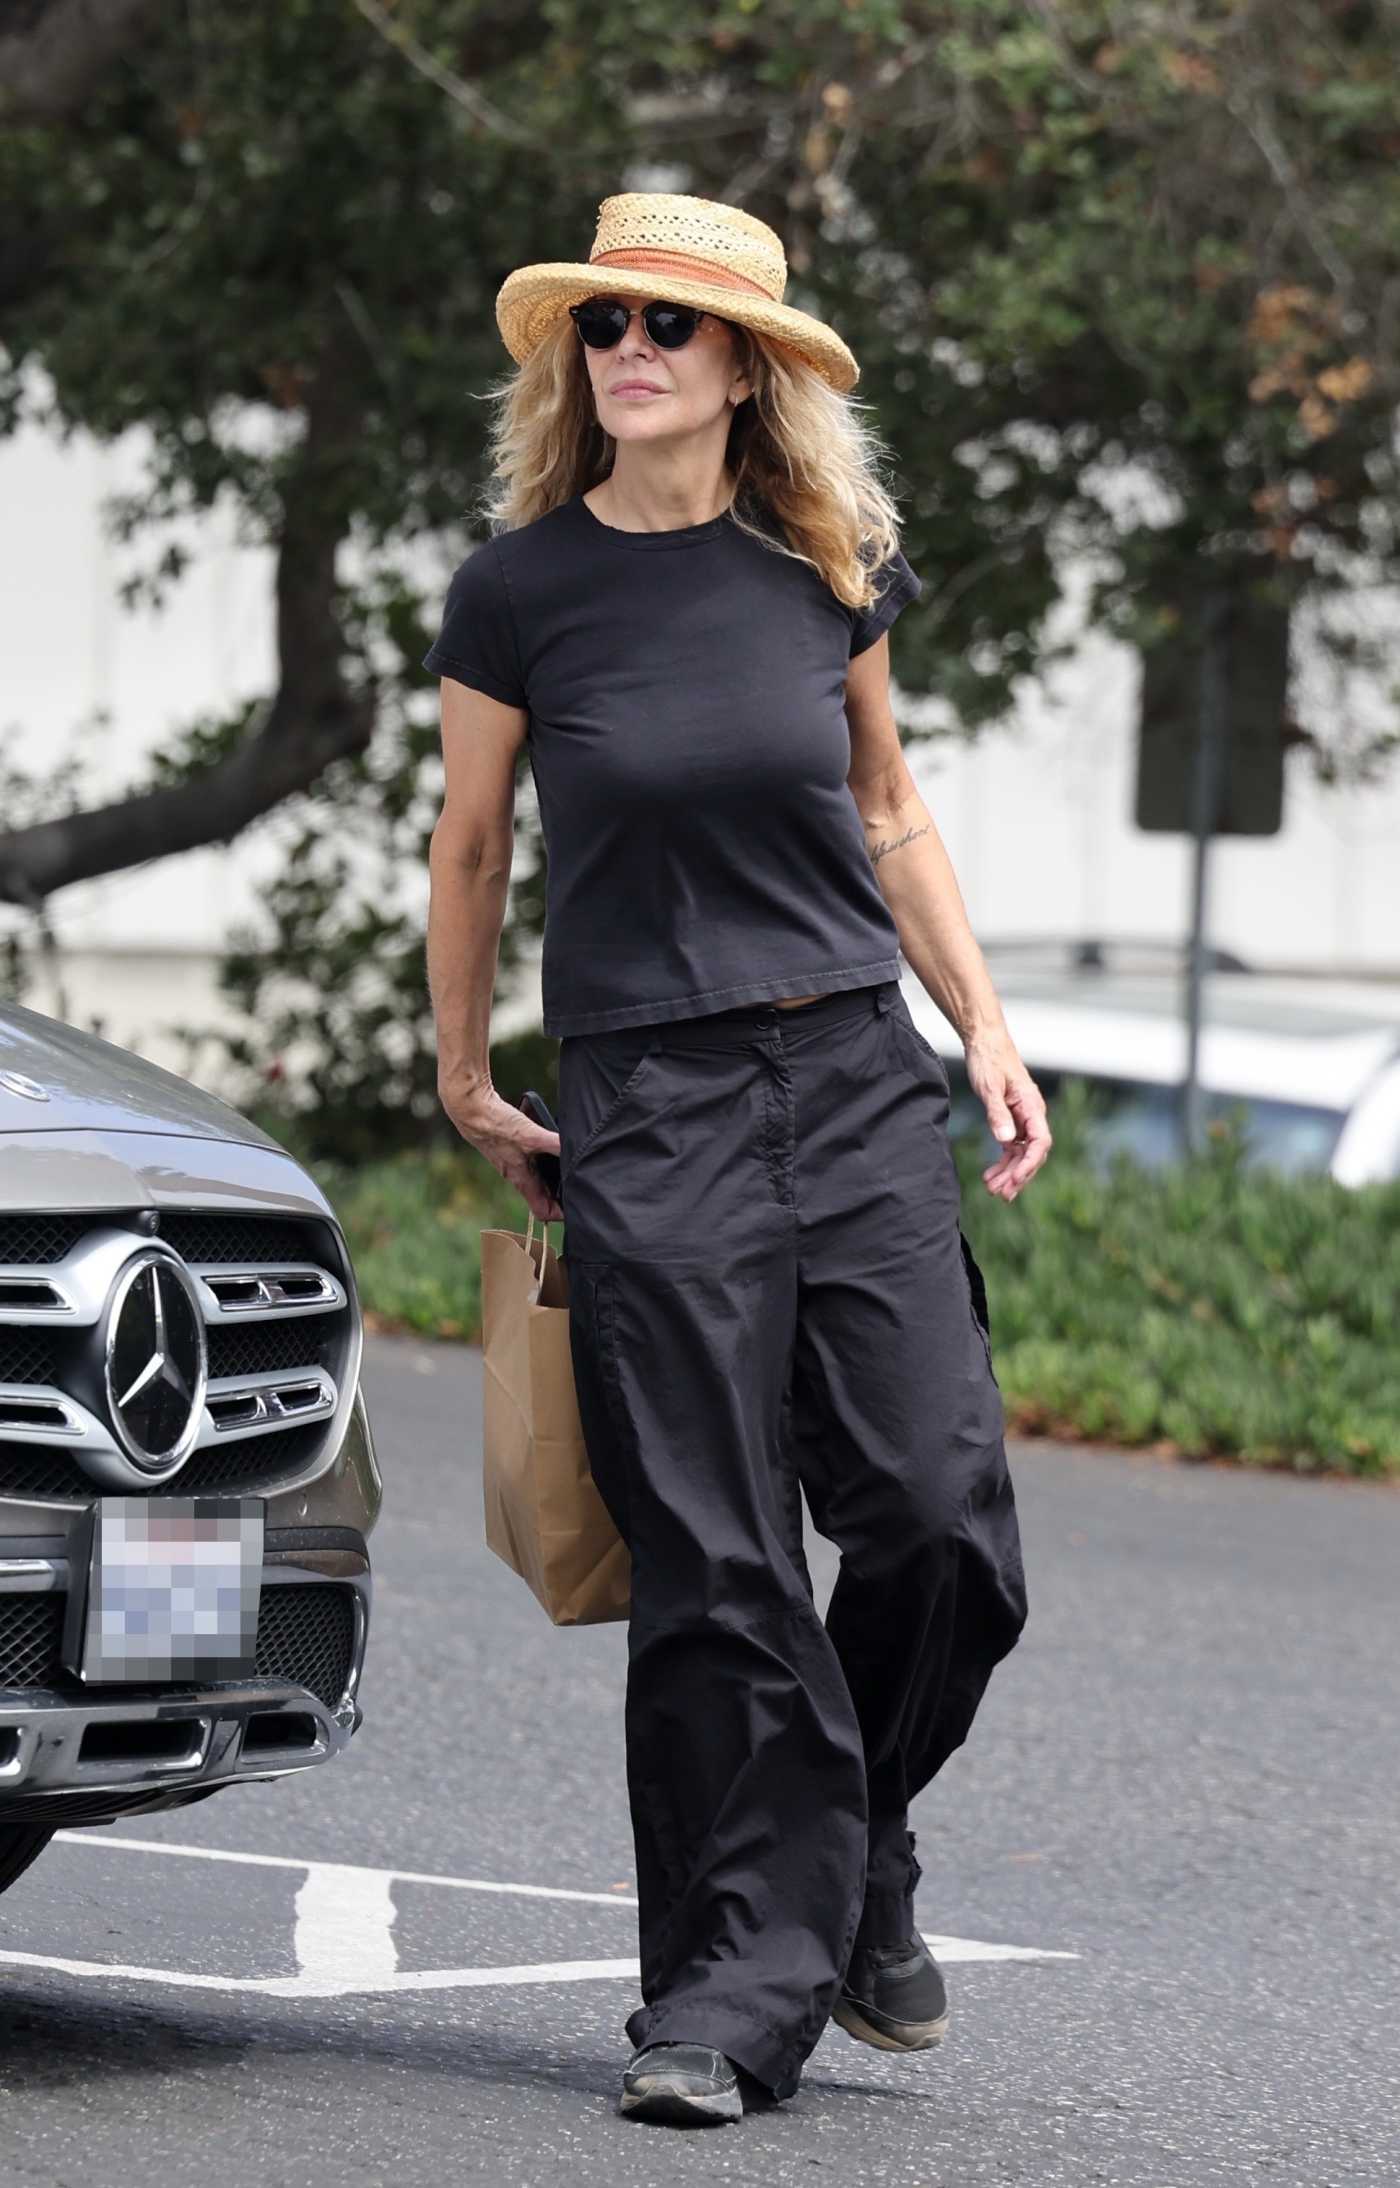 Meg Ryan in a Black Outfit Picks Up Her Lunch in Santa Barbara 08/26/2022